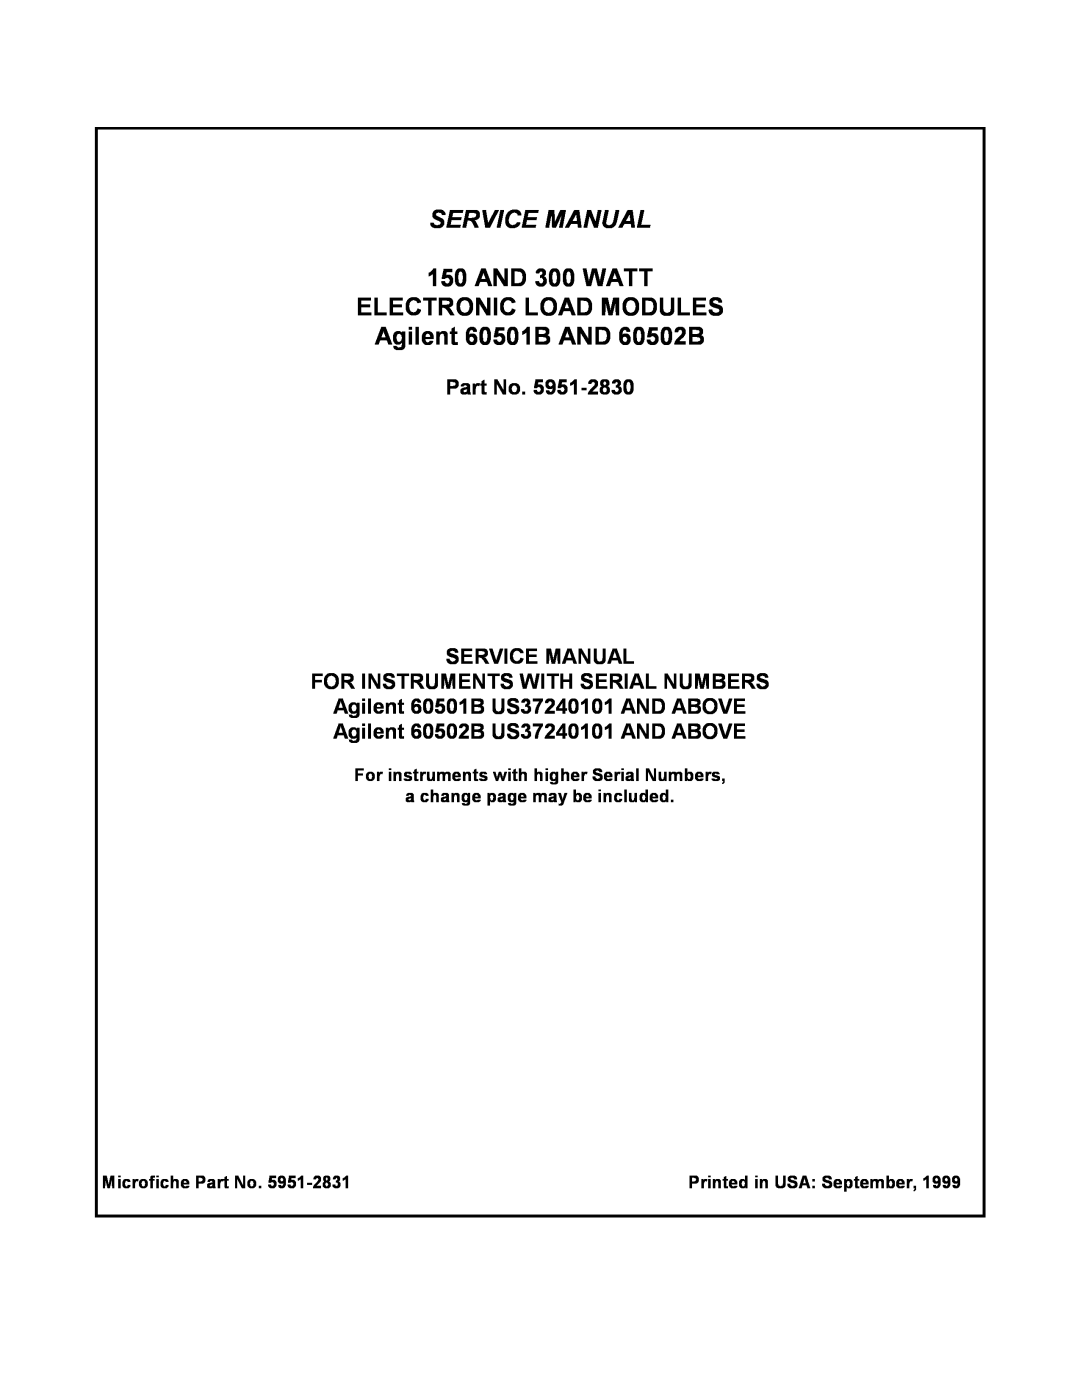 Agilent Technologies 60502B, 60501B service manual Service Manual For Instruments With Serial Numbers, Microfiche Part No 